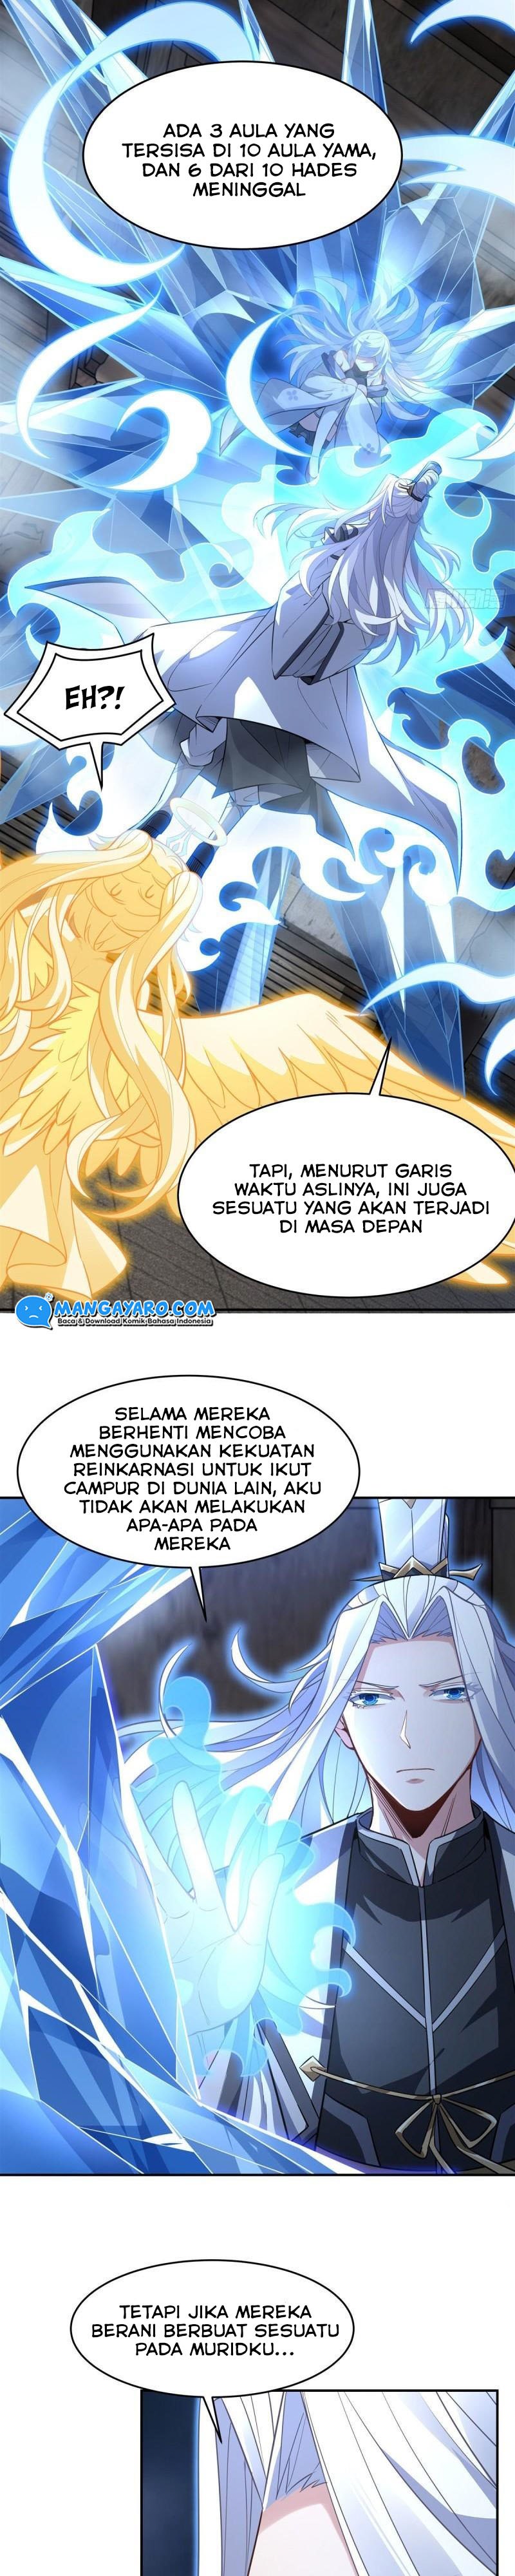 Dilarang COPAS - situs resmi www.mangacanblog.com - Komik my female apprentices are all big shots from the future 063 - chapter 63 64 Indonesia my female apprentices are all big shots from the future 063 - chapter 63 Terbaru 4|Baca Manga Komik Indonesia|Mangacan